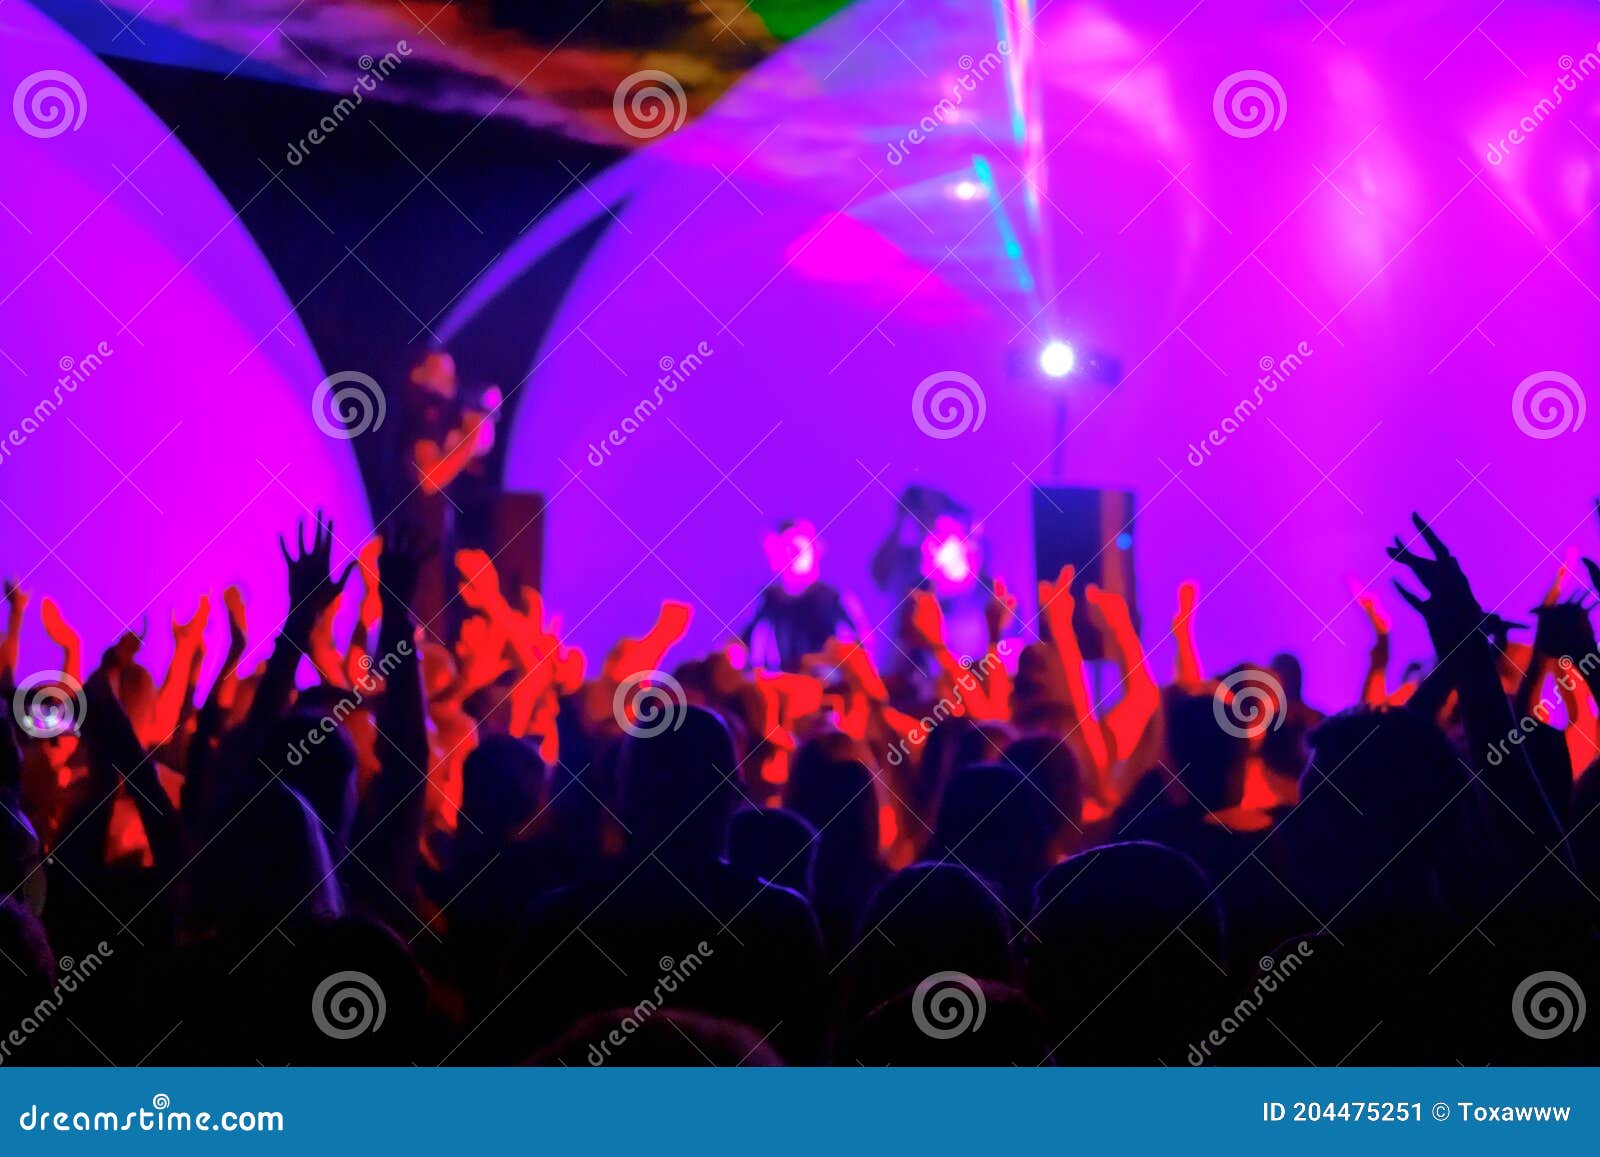 Crowd and DJs Dancing during Party Stock Image - Image of crowd, club ...